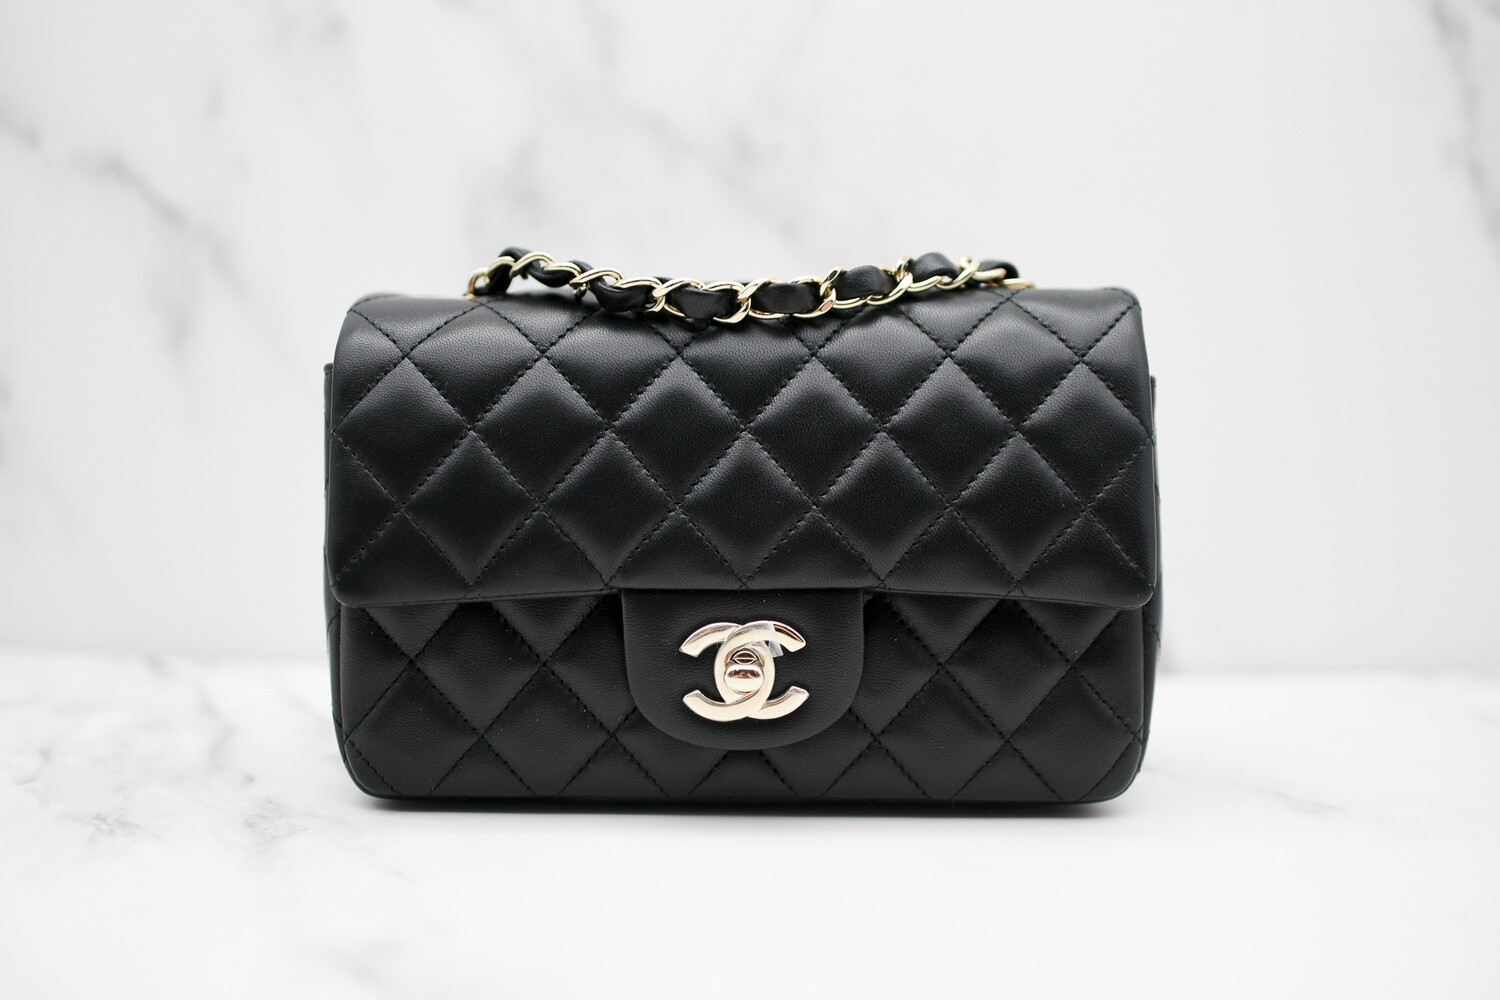 Chanel Mini Flap Bag in Light Gold Hardware, Luxury, Bags